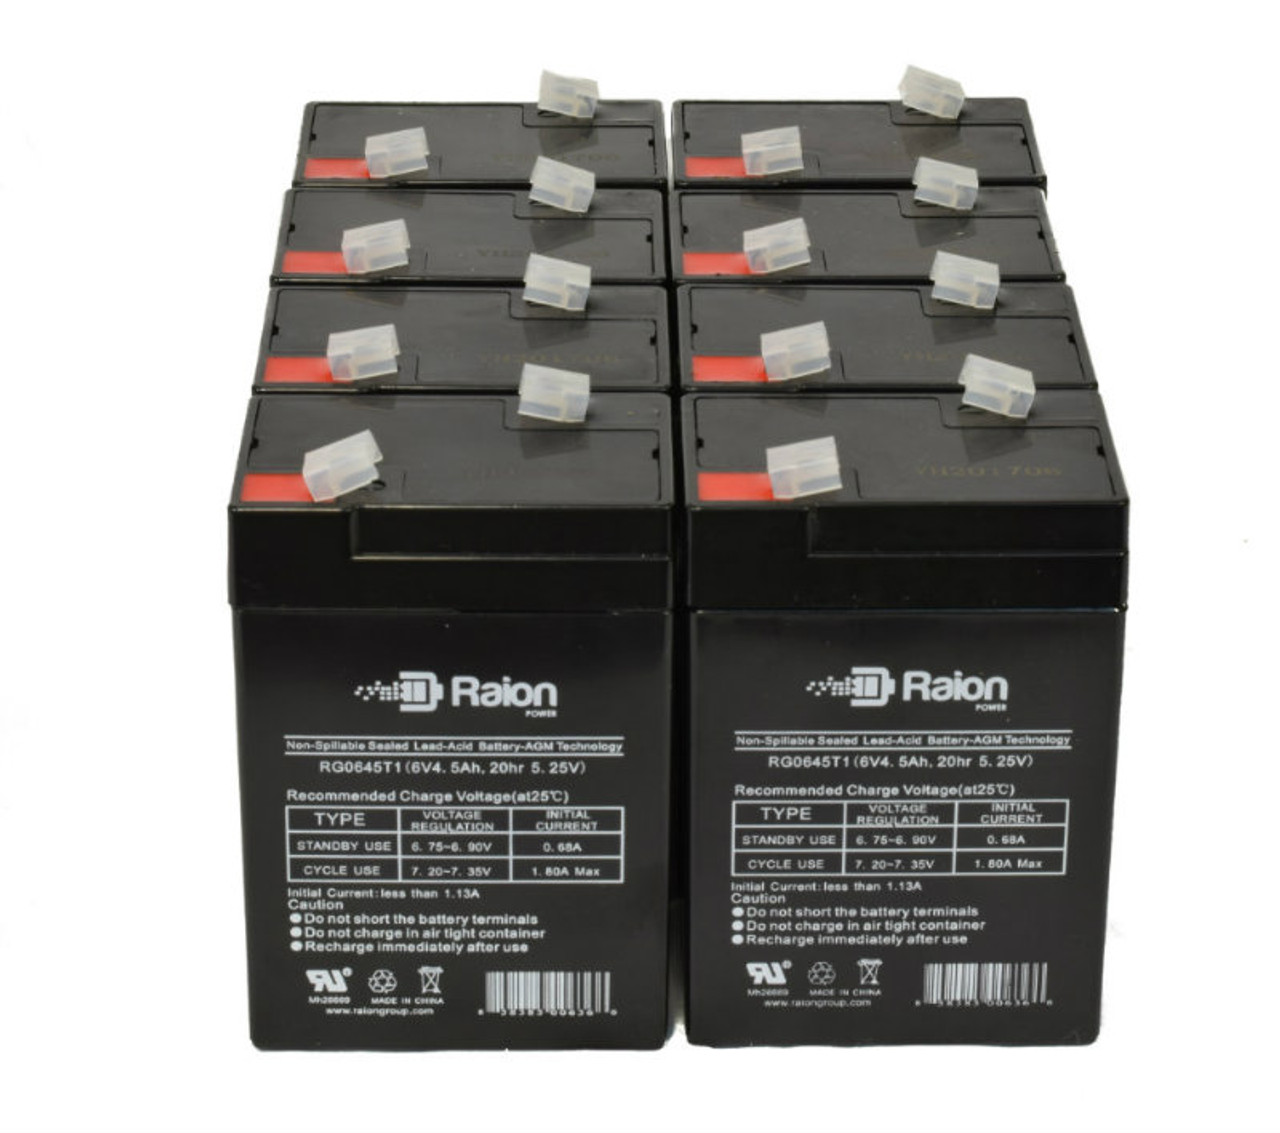 Raion Power 6 Volt 4.5Ah RG0645T1 Replacement Battery for Newmox FNC-640 - 8 Pack